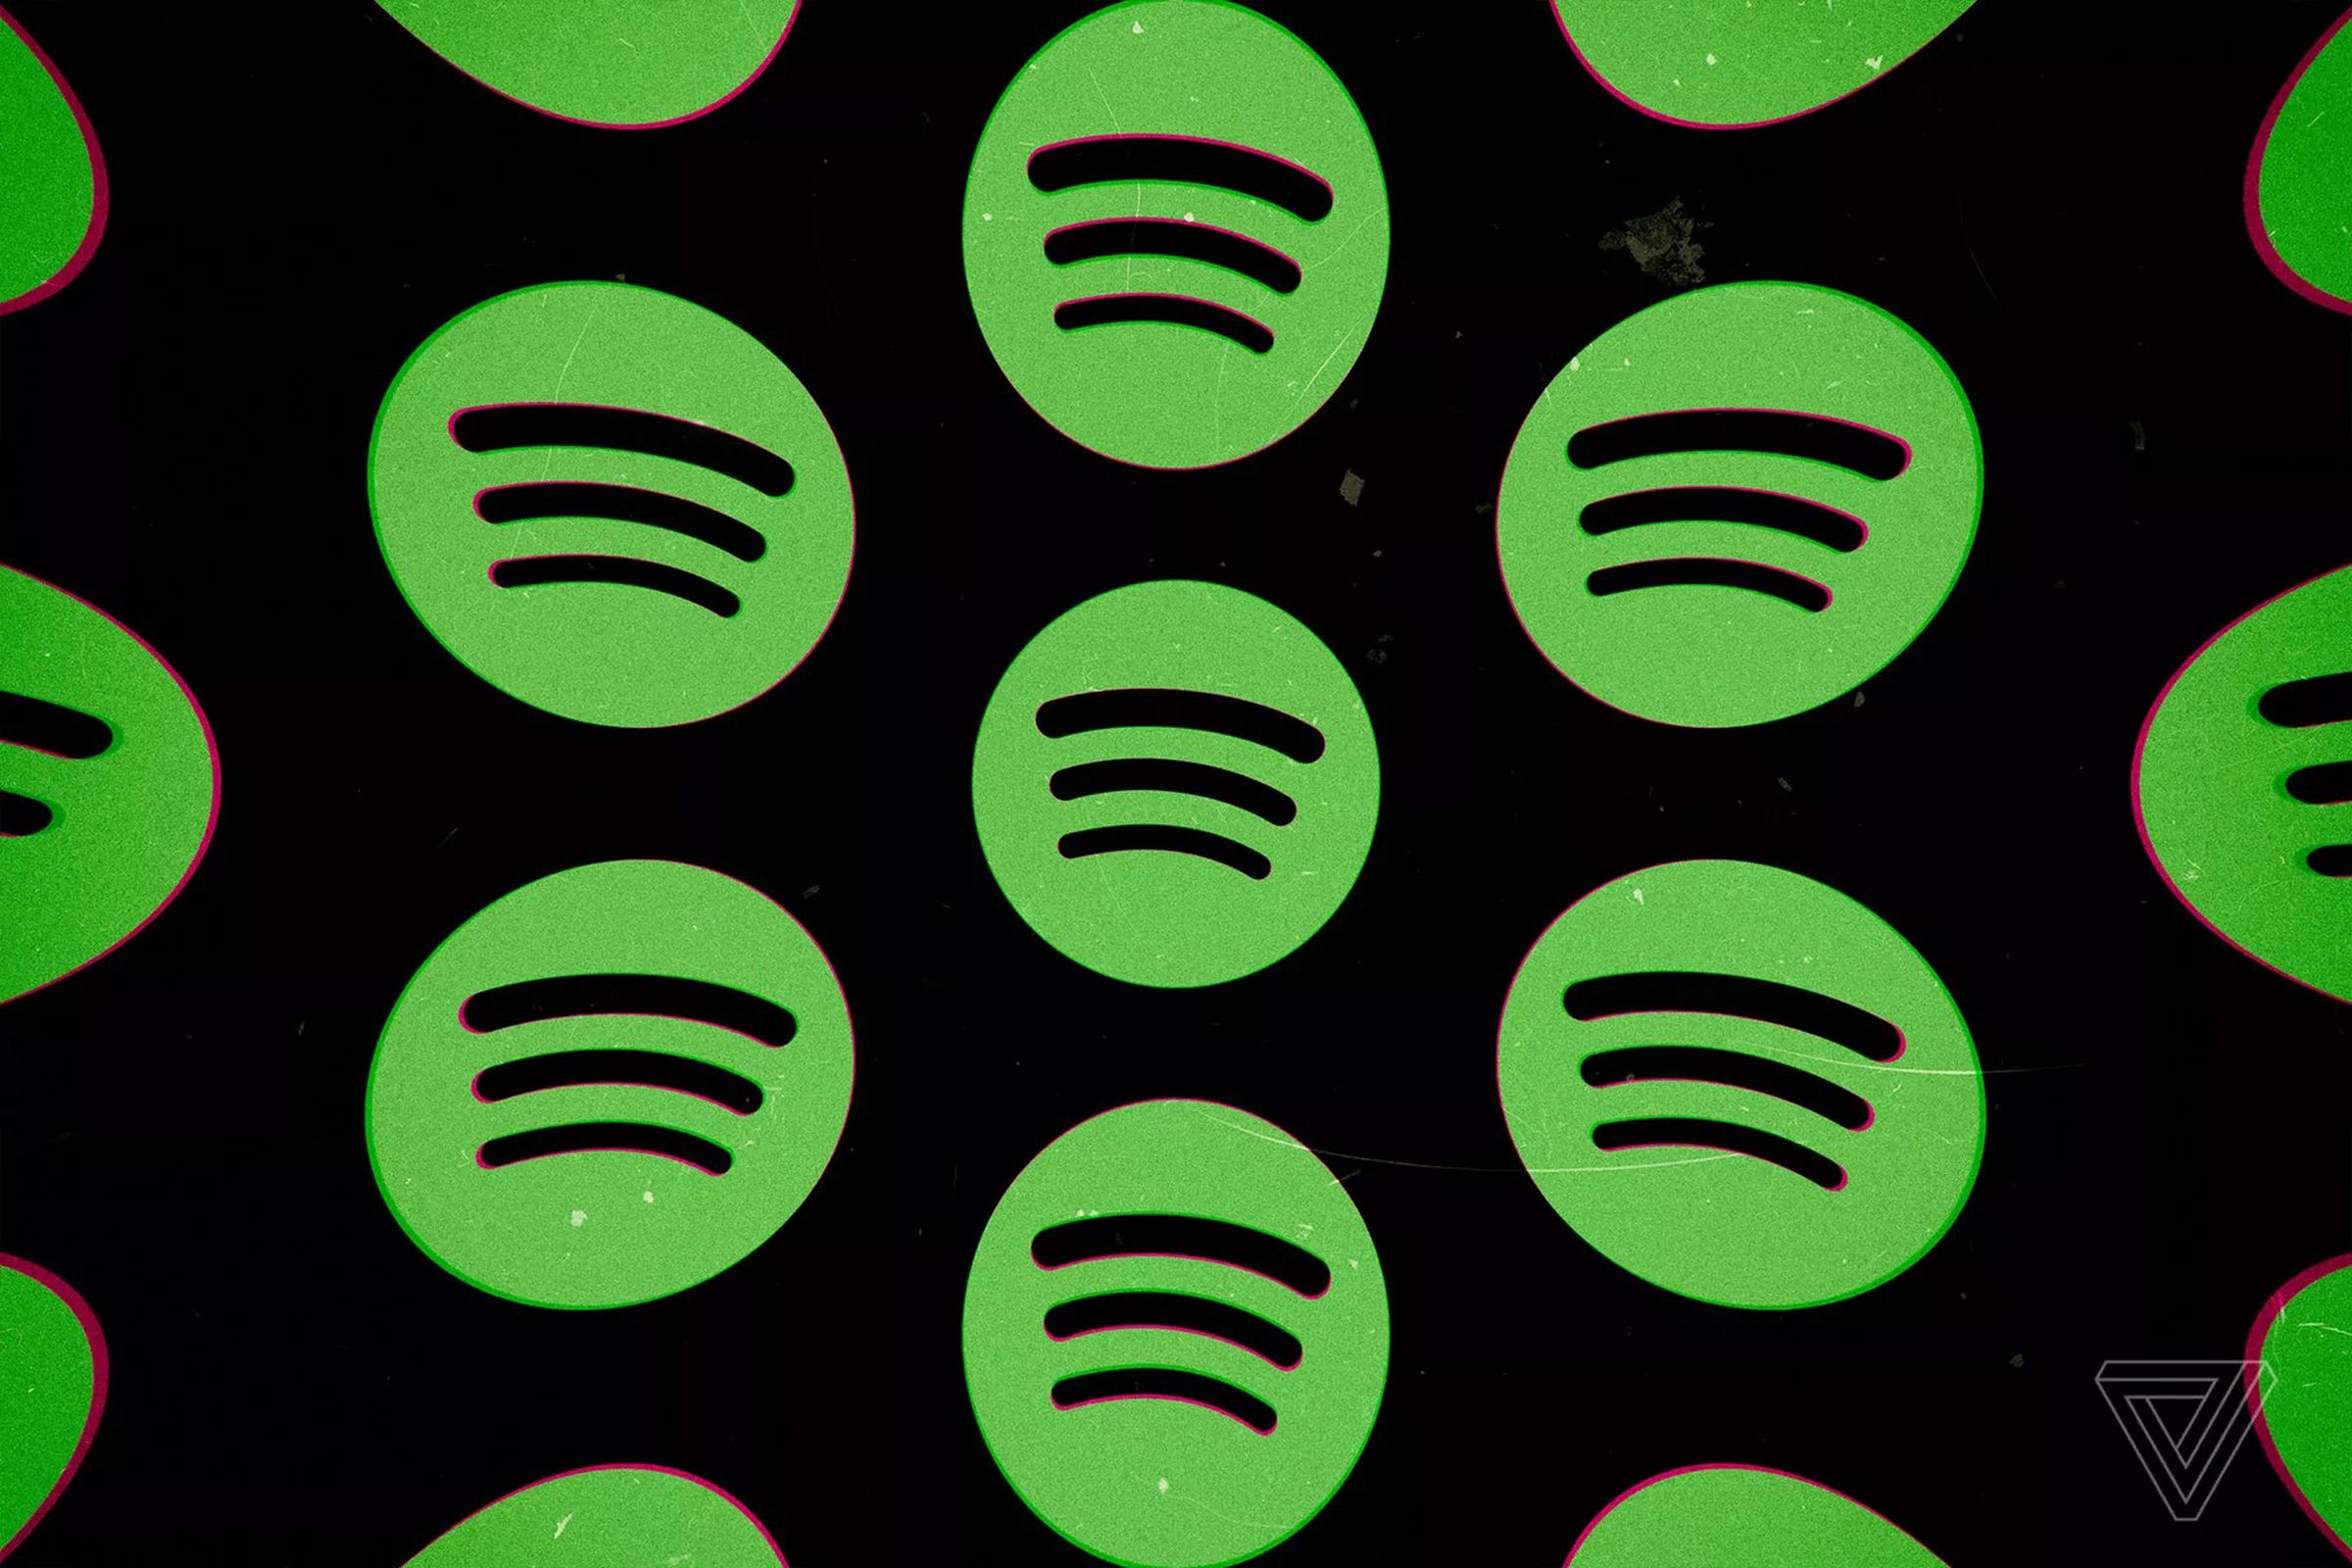 Spotify has made it easier to block other users